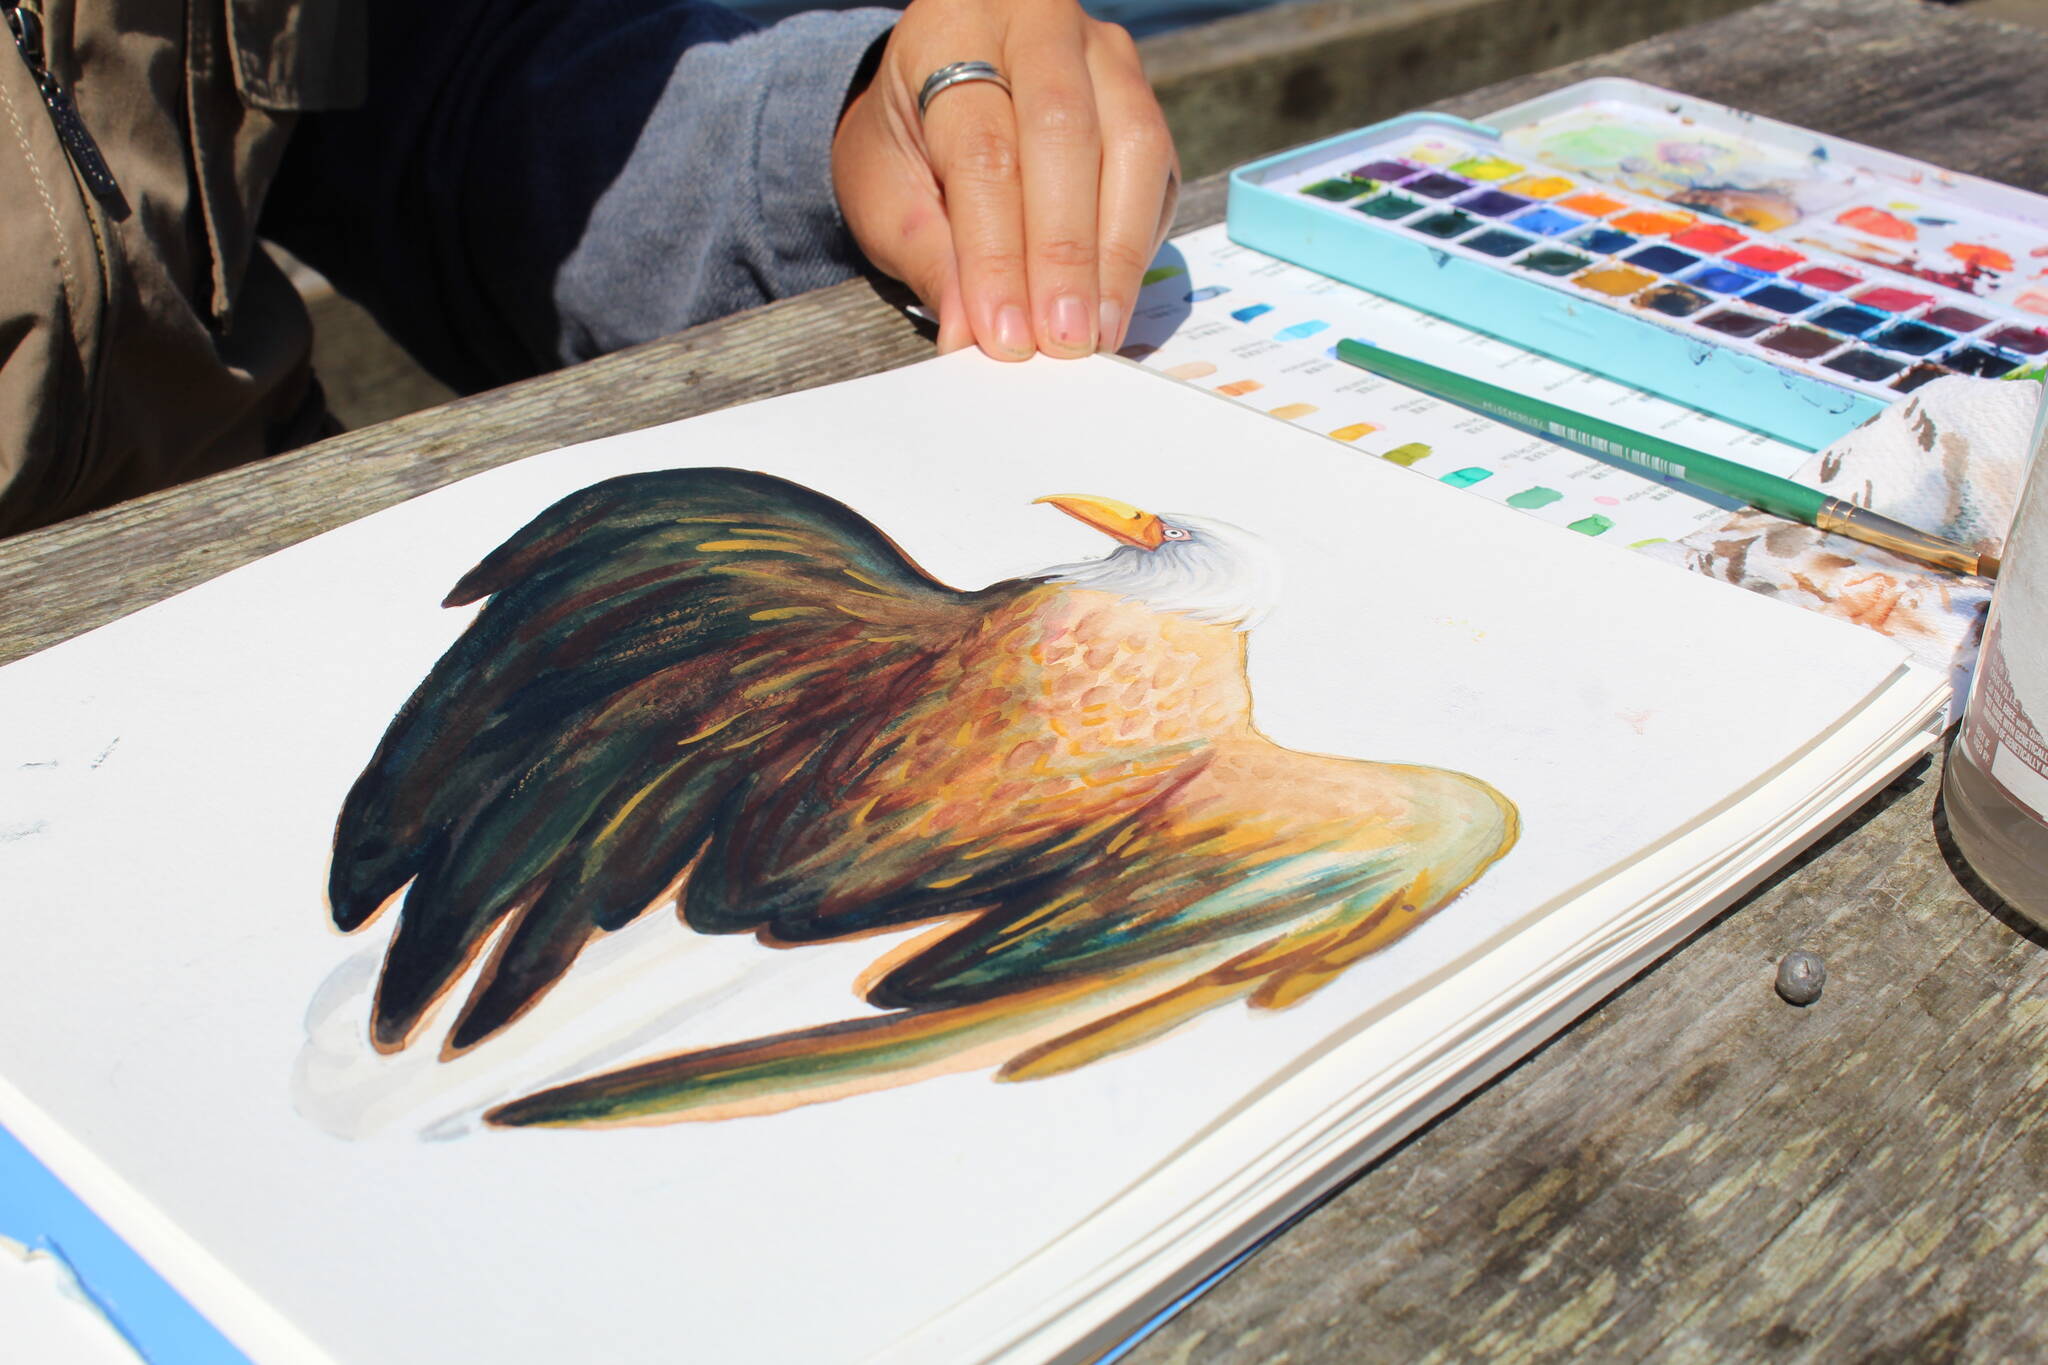 Photo by Karina Andrew/Whidbey News-Times
Nina Vichayapai shows her watercolor painting of an eagle.